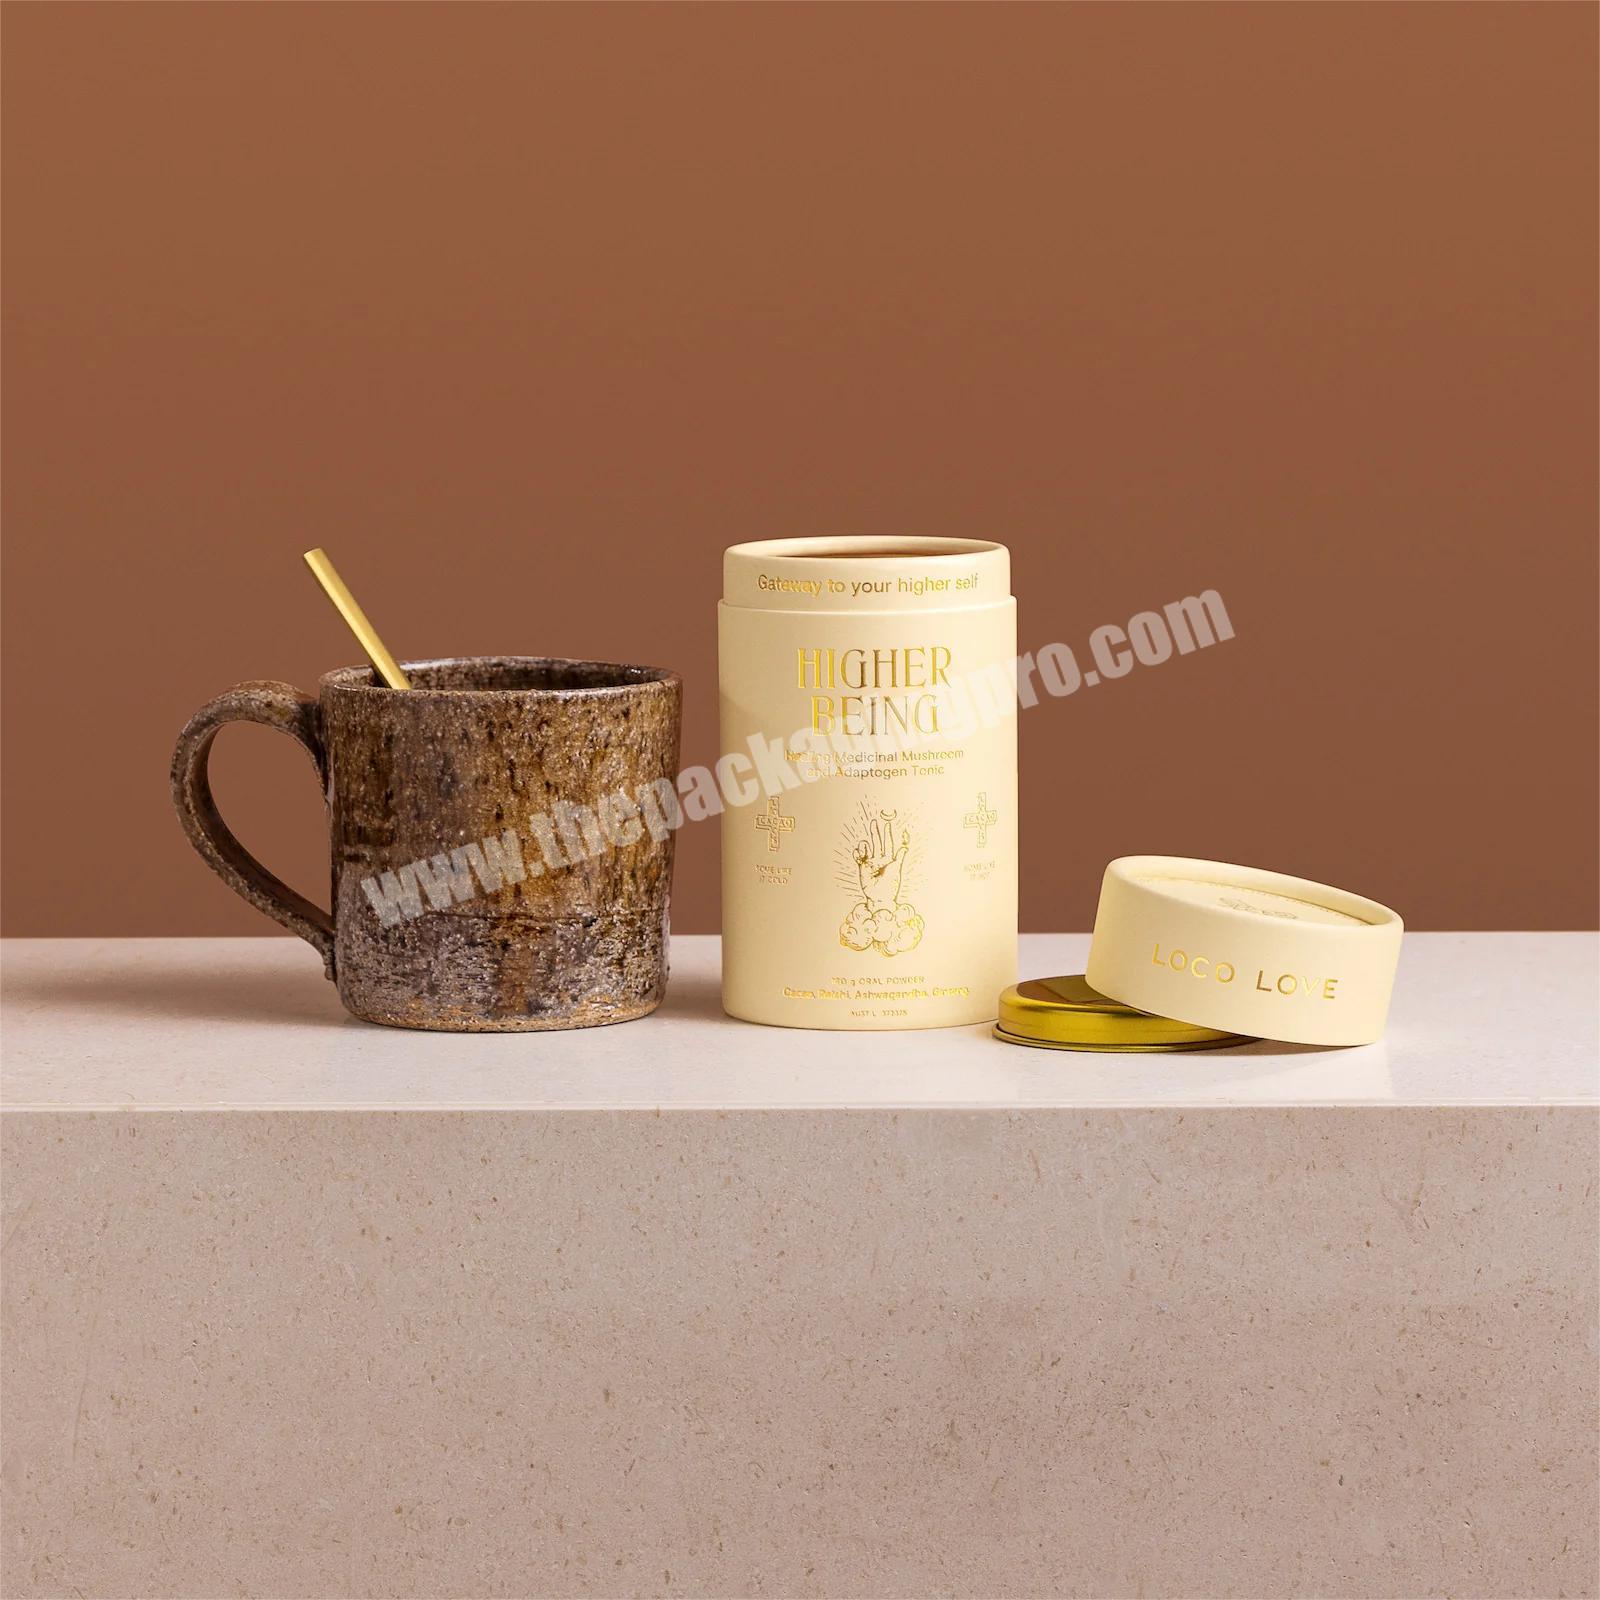 Tea Paper Tube Packaging Food Grade Cardboard Cylinder Container For Tea Round Box Packaging